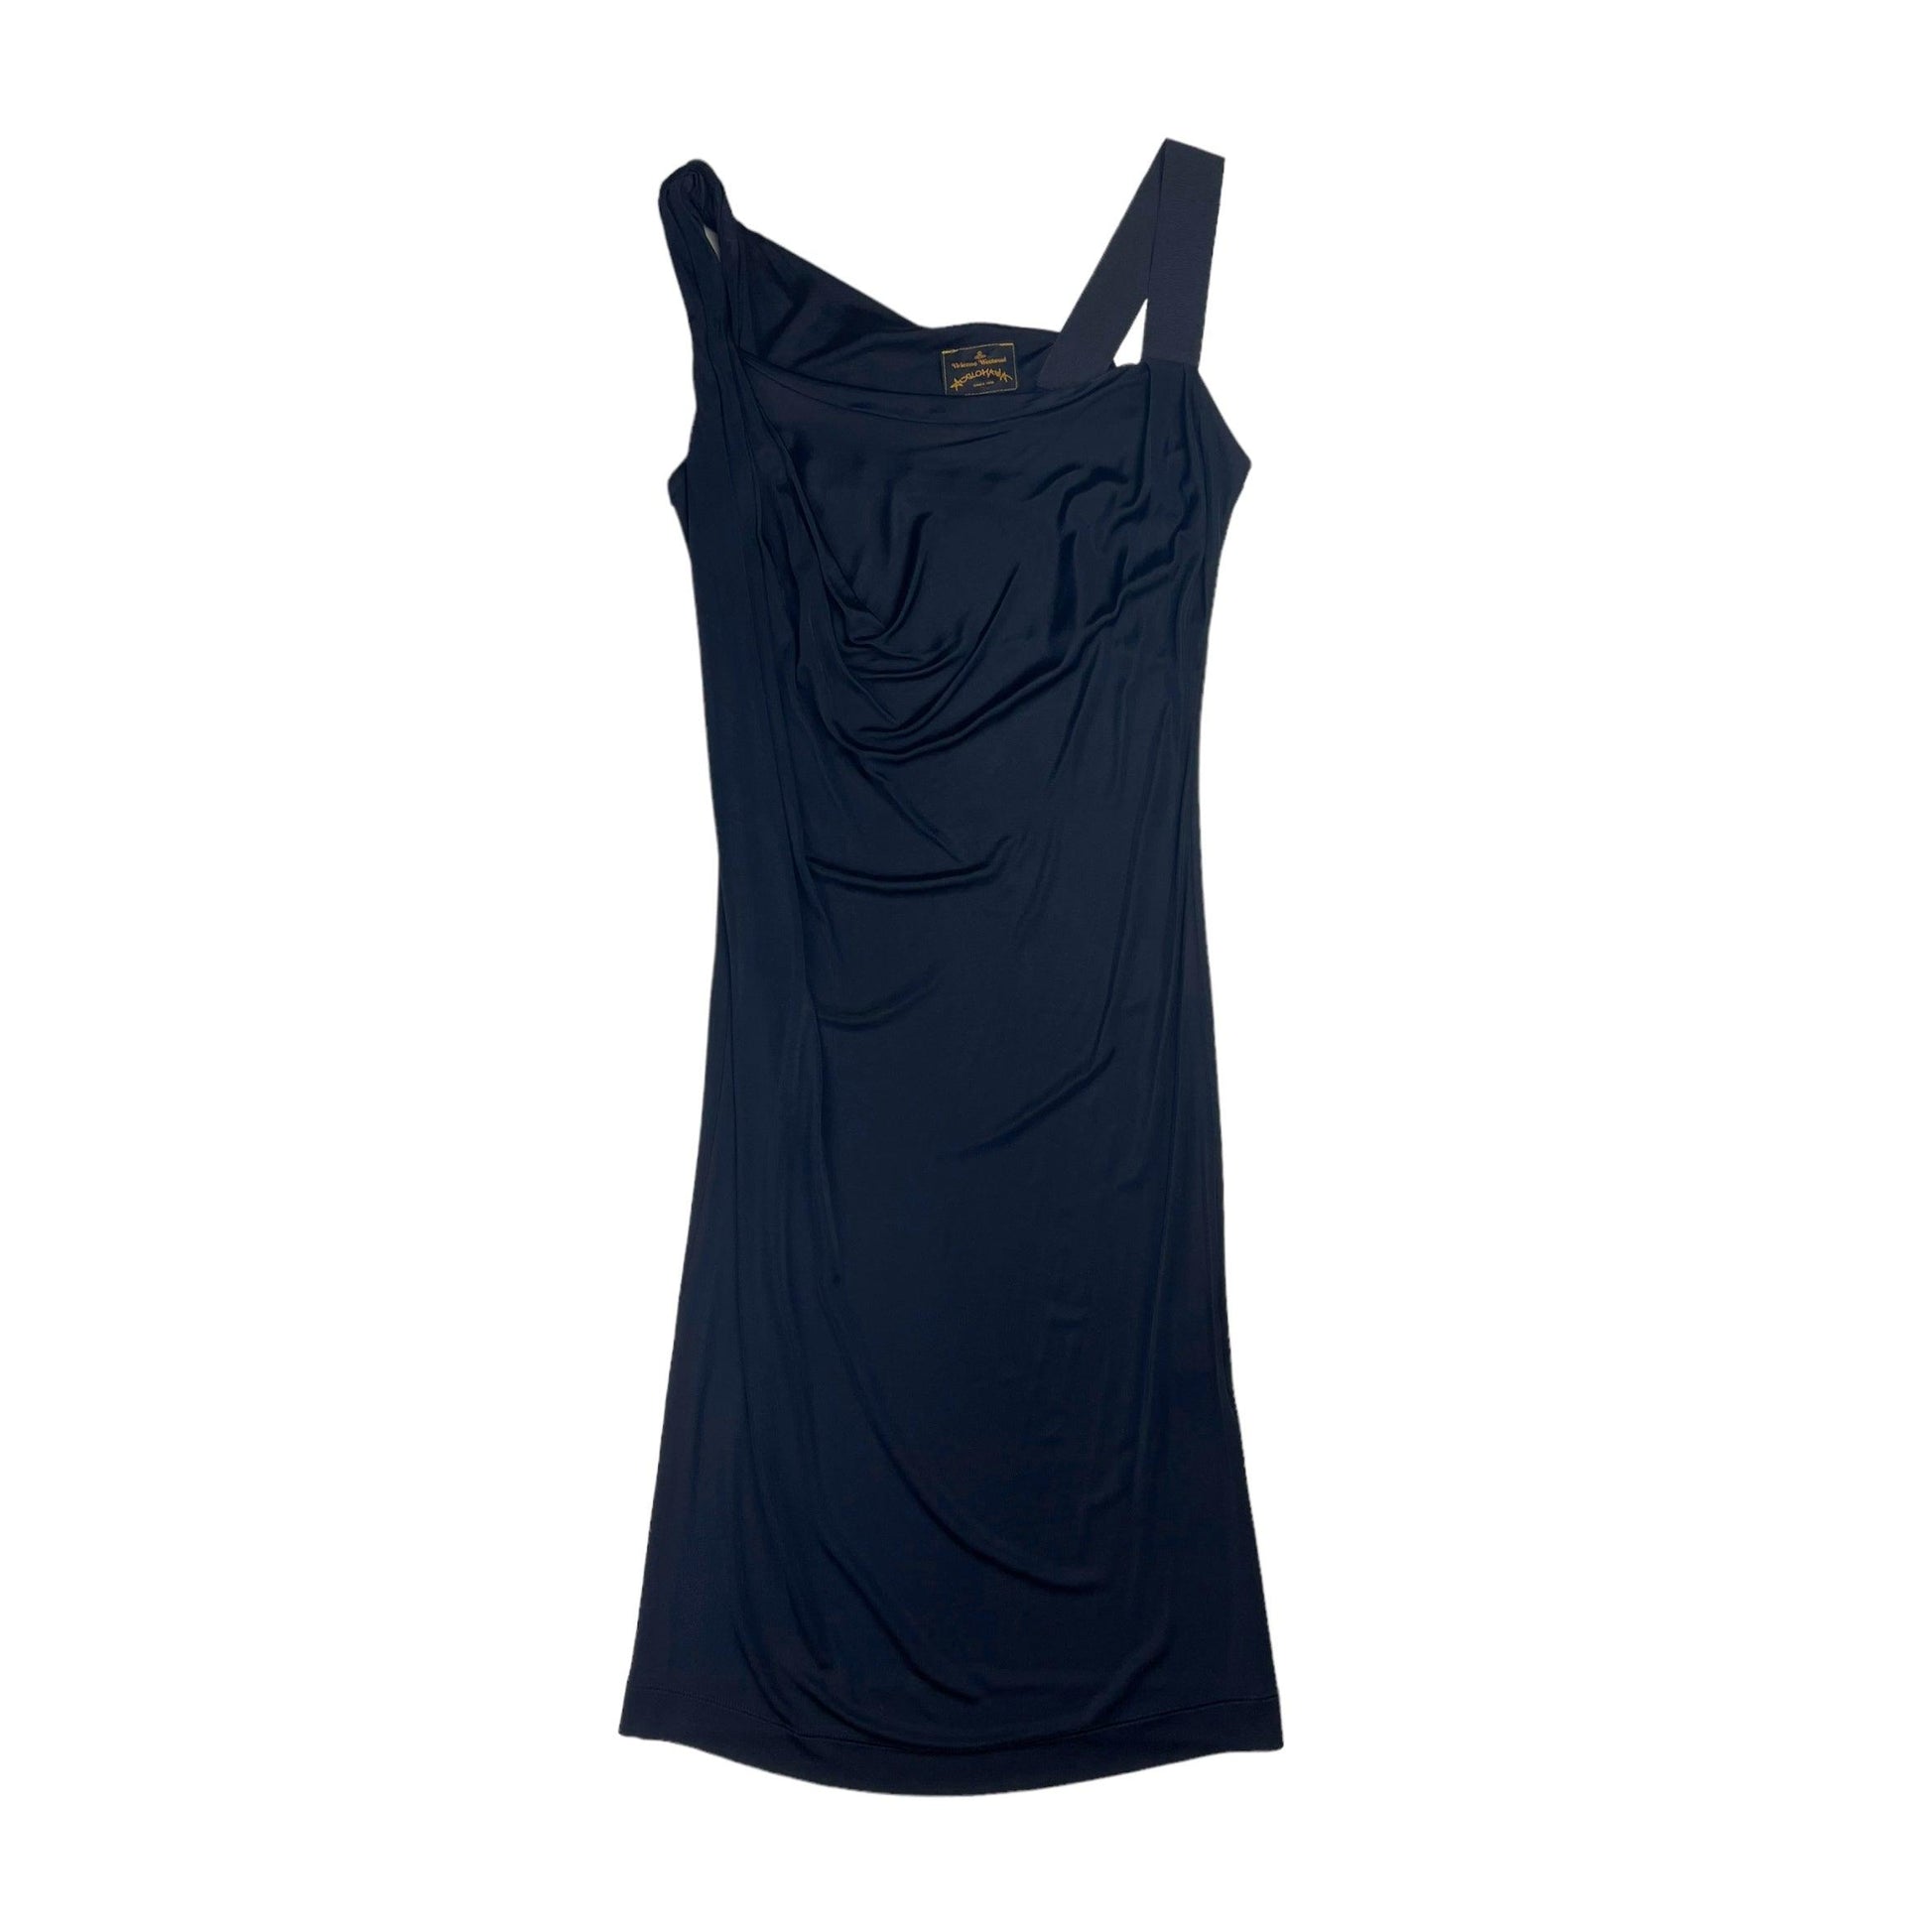 Vivienne Westwood Anglomania dress - Known Source